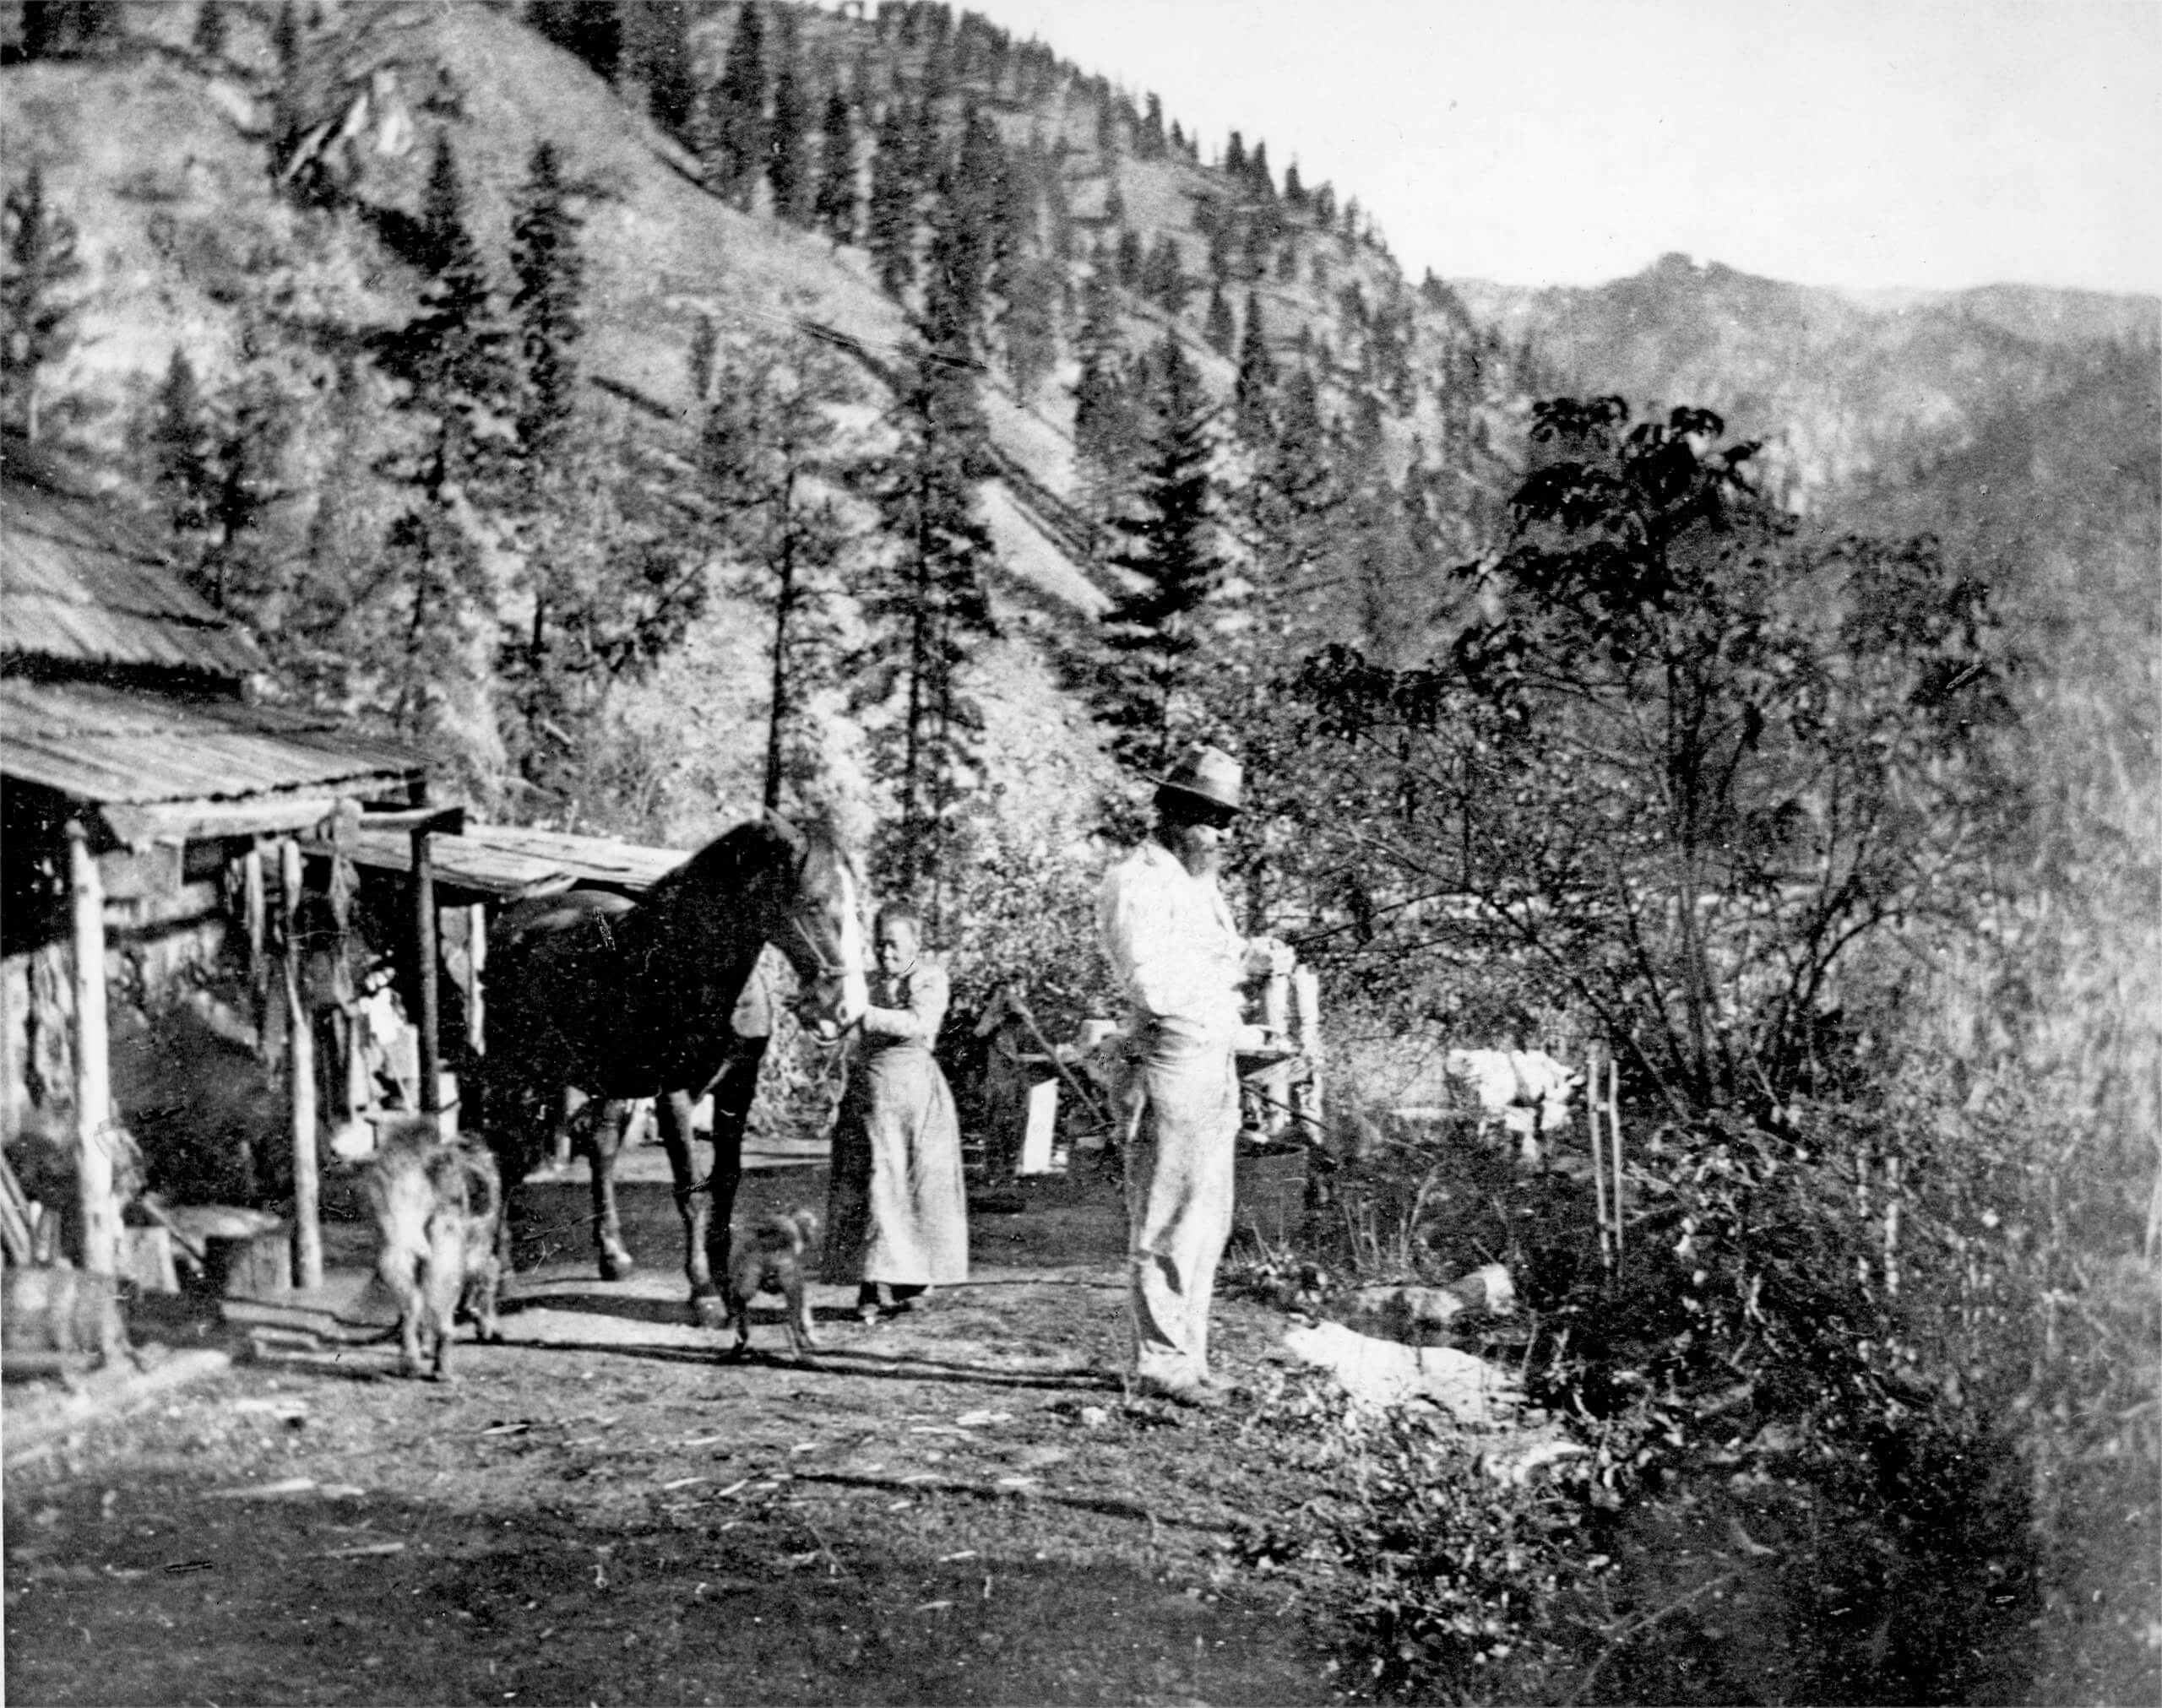 A black-and-white photo of Polly and Charlie Bemis standing in front of their cabin with a horse and dogs.